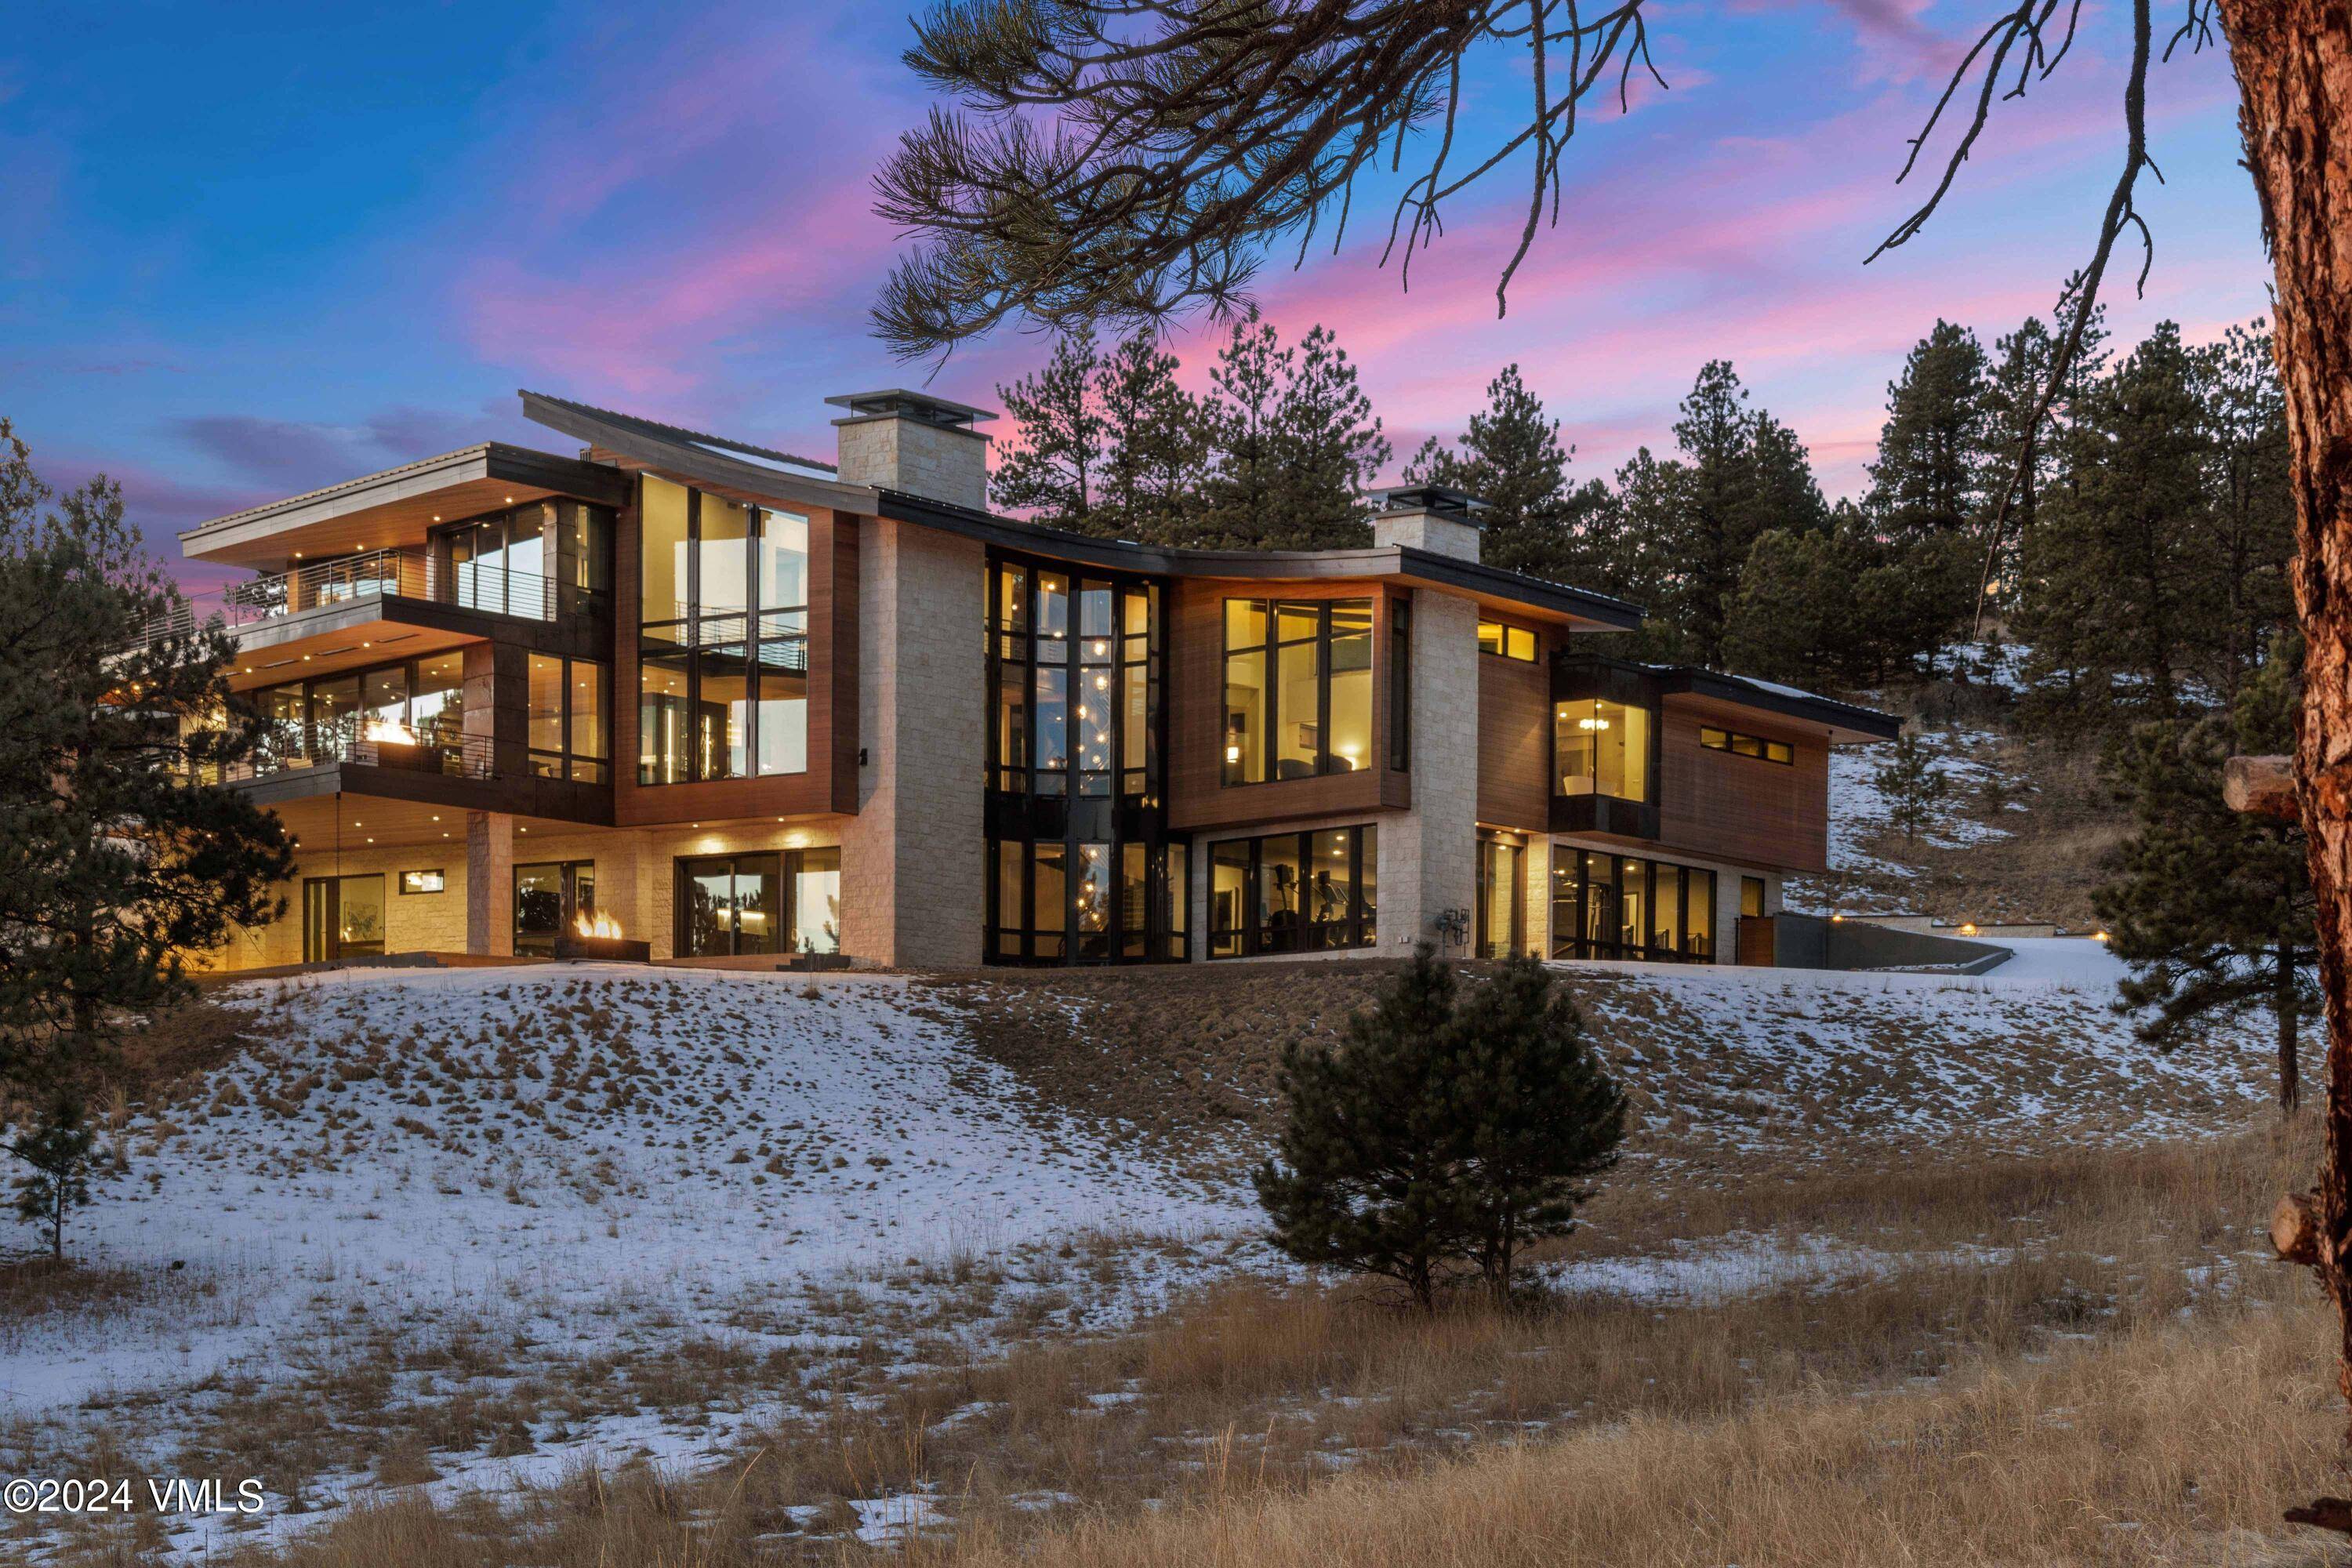 Tucked away in the quiet grandeur of Evergreen, Colorado, this luxurious 9, 459 square foot home sits on a private 10.